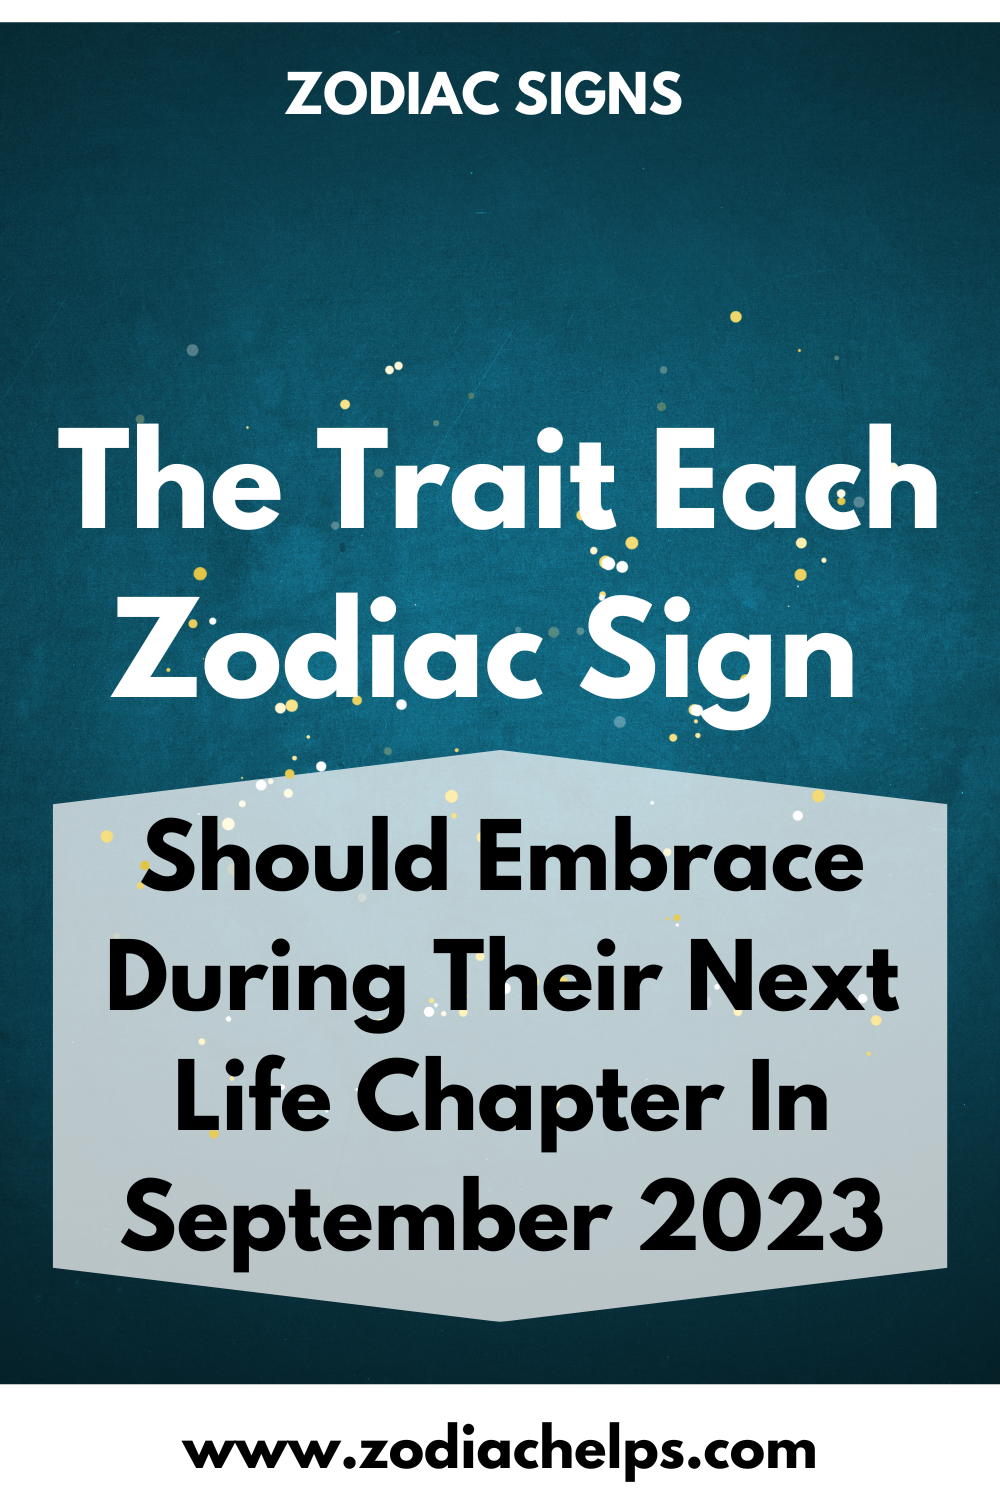 The Trait Each Zodiac Sign Should Embrace During Their Next Life Chapter In September 2023